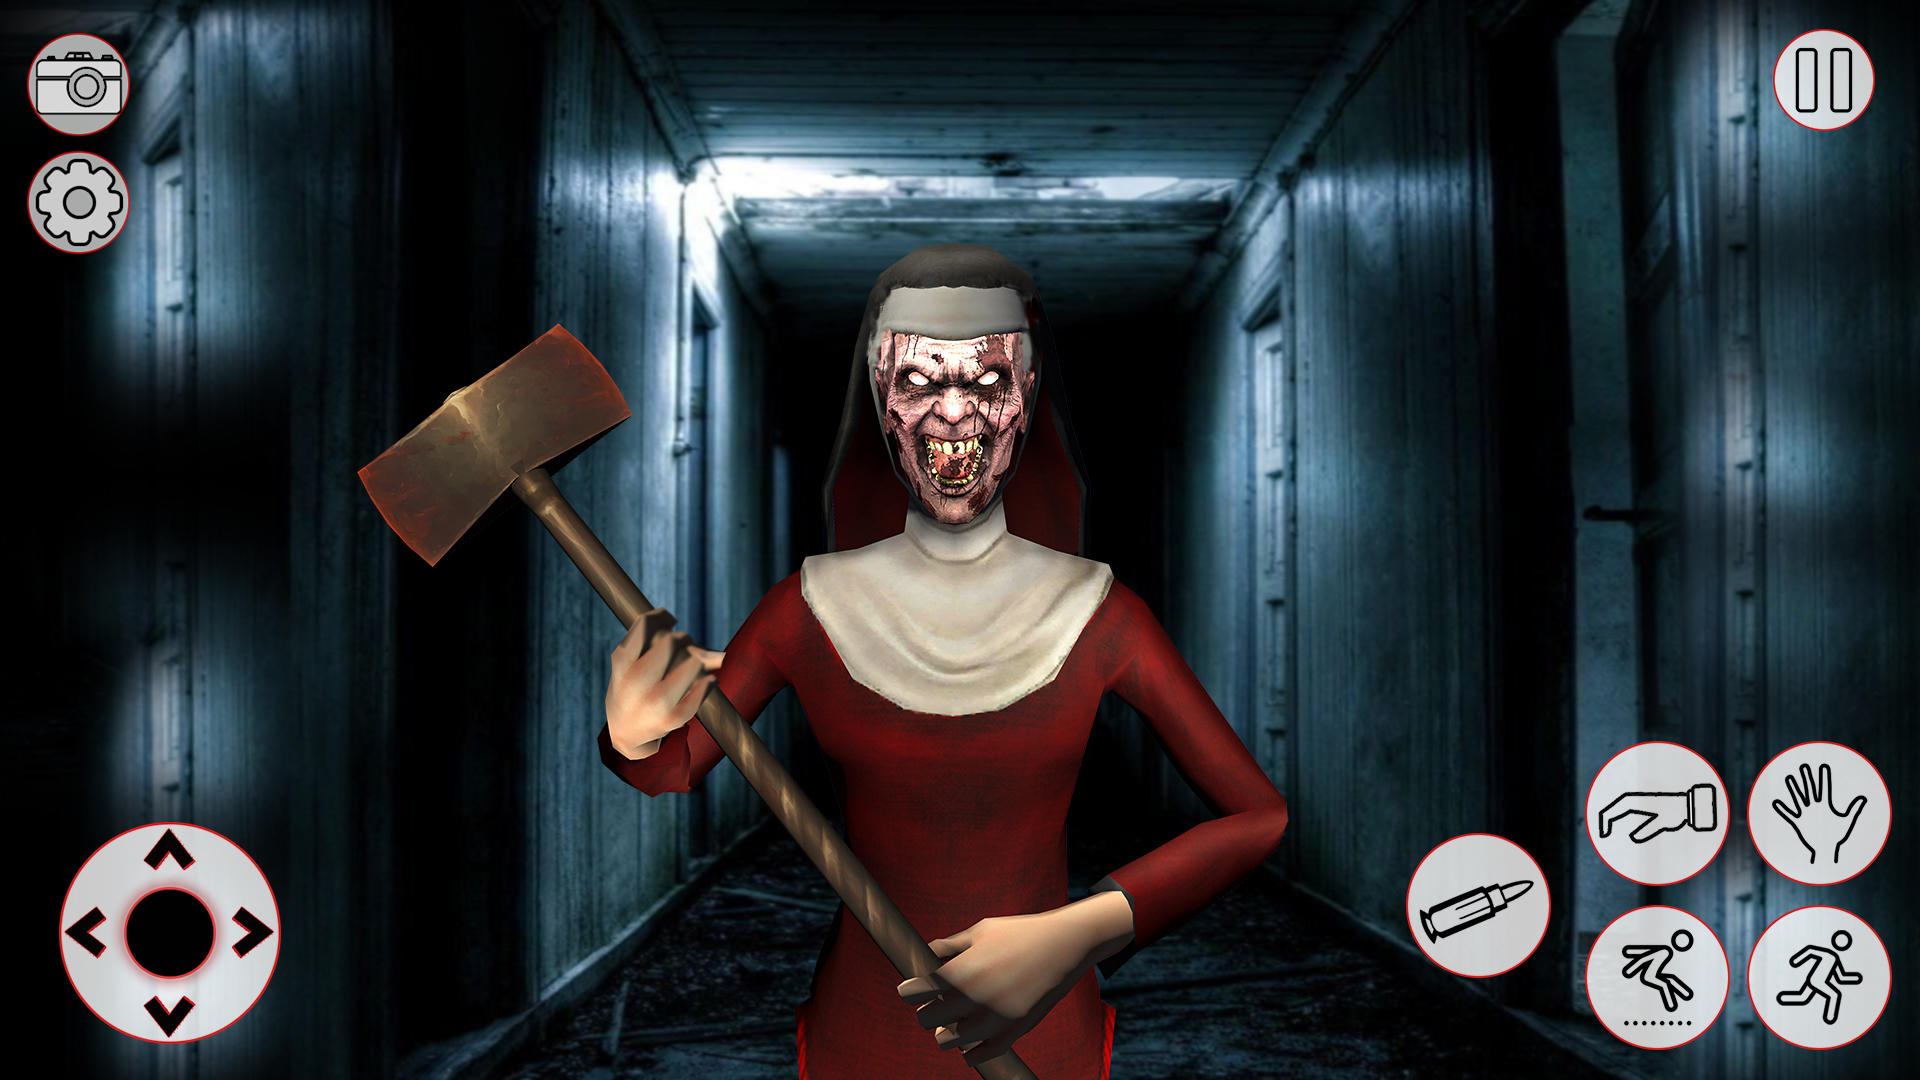 Scary Granny Horror Games 3D screenshot game